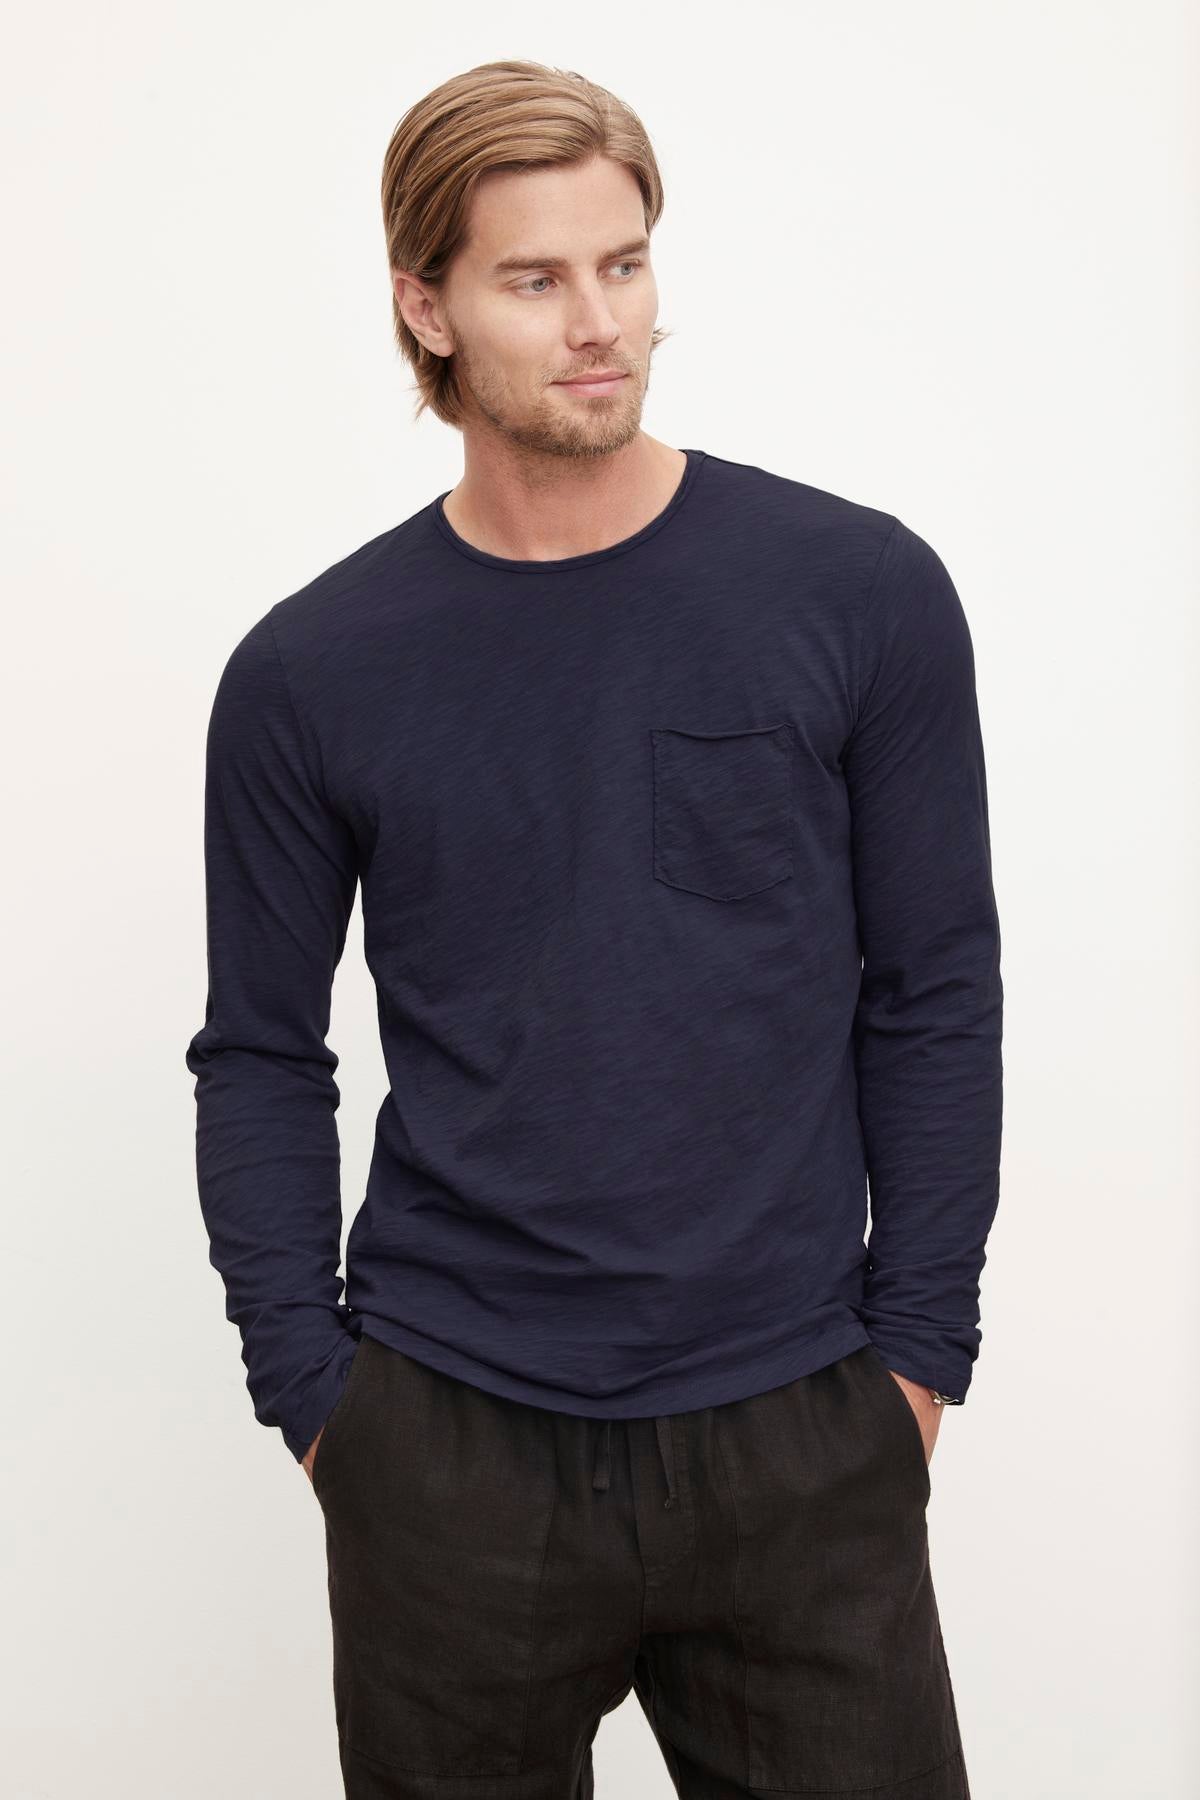   A man with neatly styled hair wearing a long-sleeve navy blue SIMEON RAW EDGE COTTON SLUB TEE with a pocket by Velvet by Graham & Spencer, posing with one hand in his pocket. 